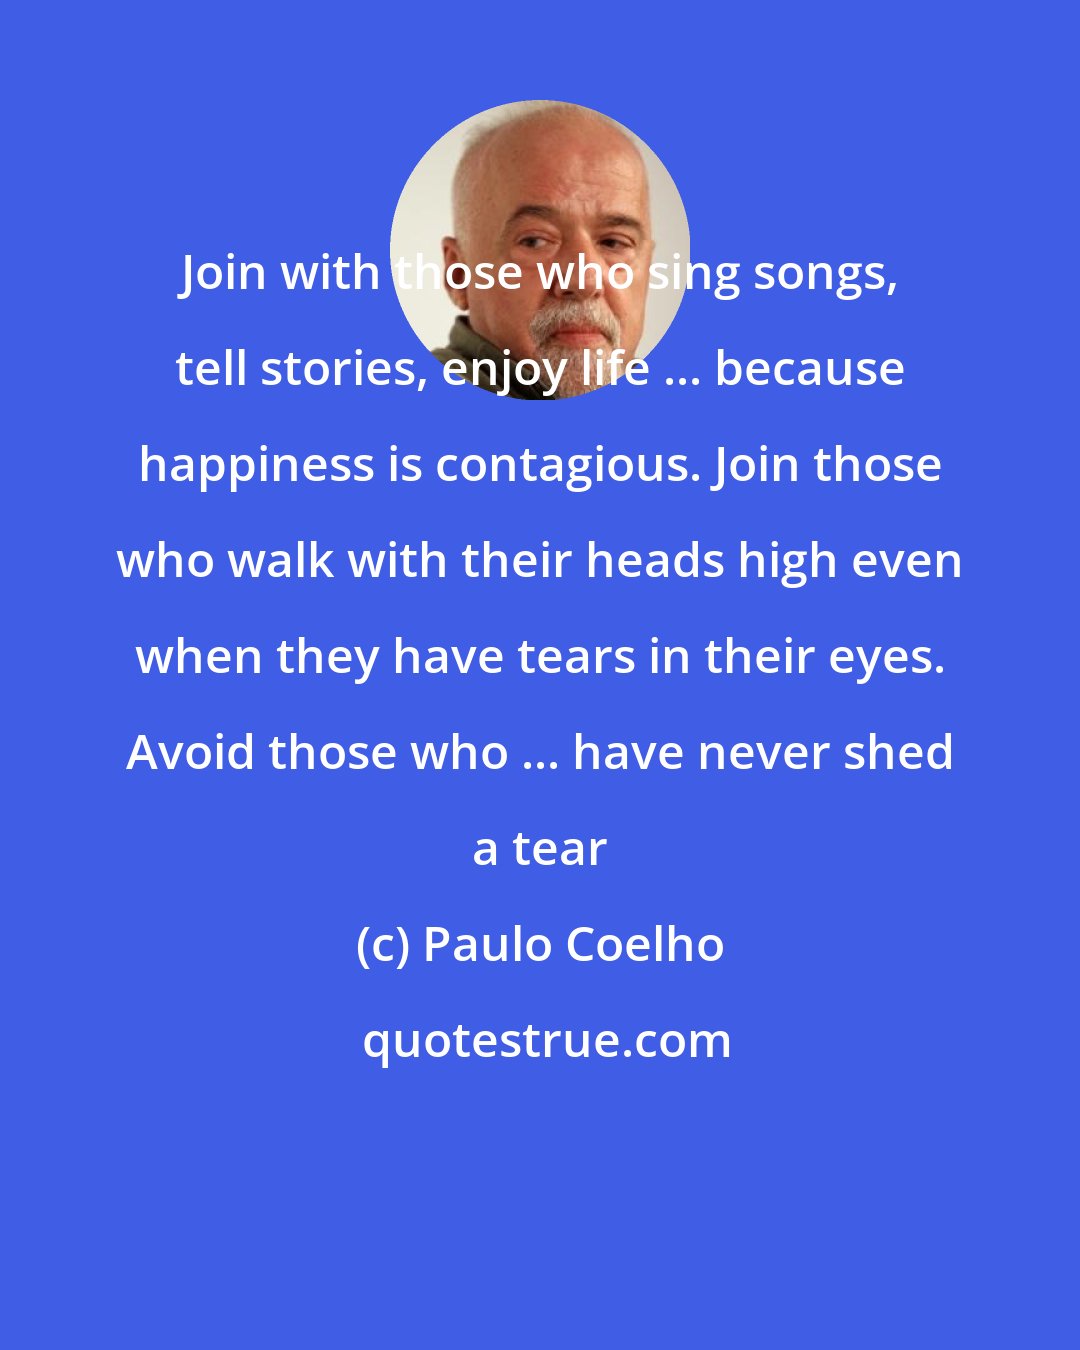 Paulo Coelho: Join with those who sing songs, tell stories, enjoy life ... because happiness is contagious. Join those who walk with their heads high even when they have tears in their eyes. Avoid those who ... have never shed a tear